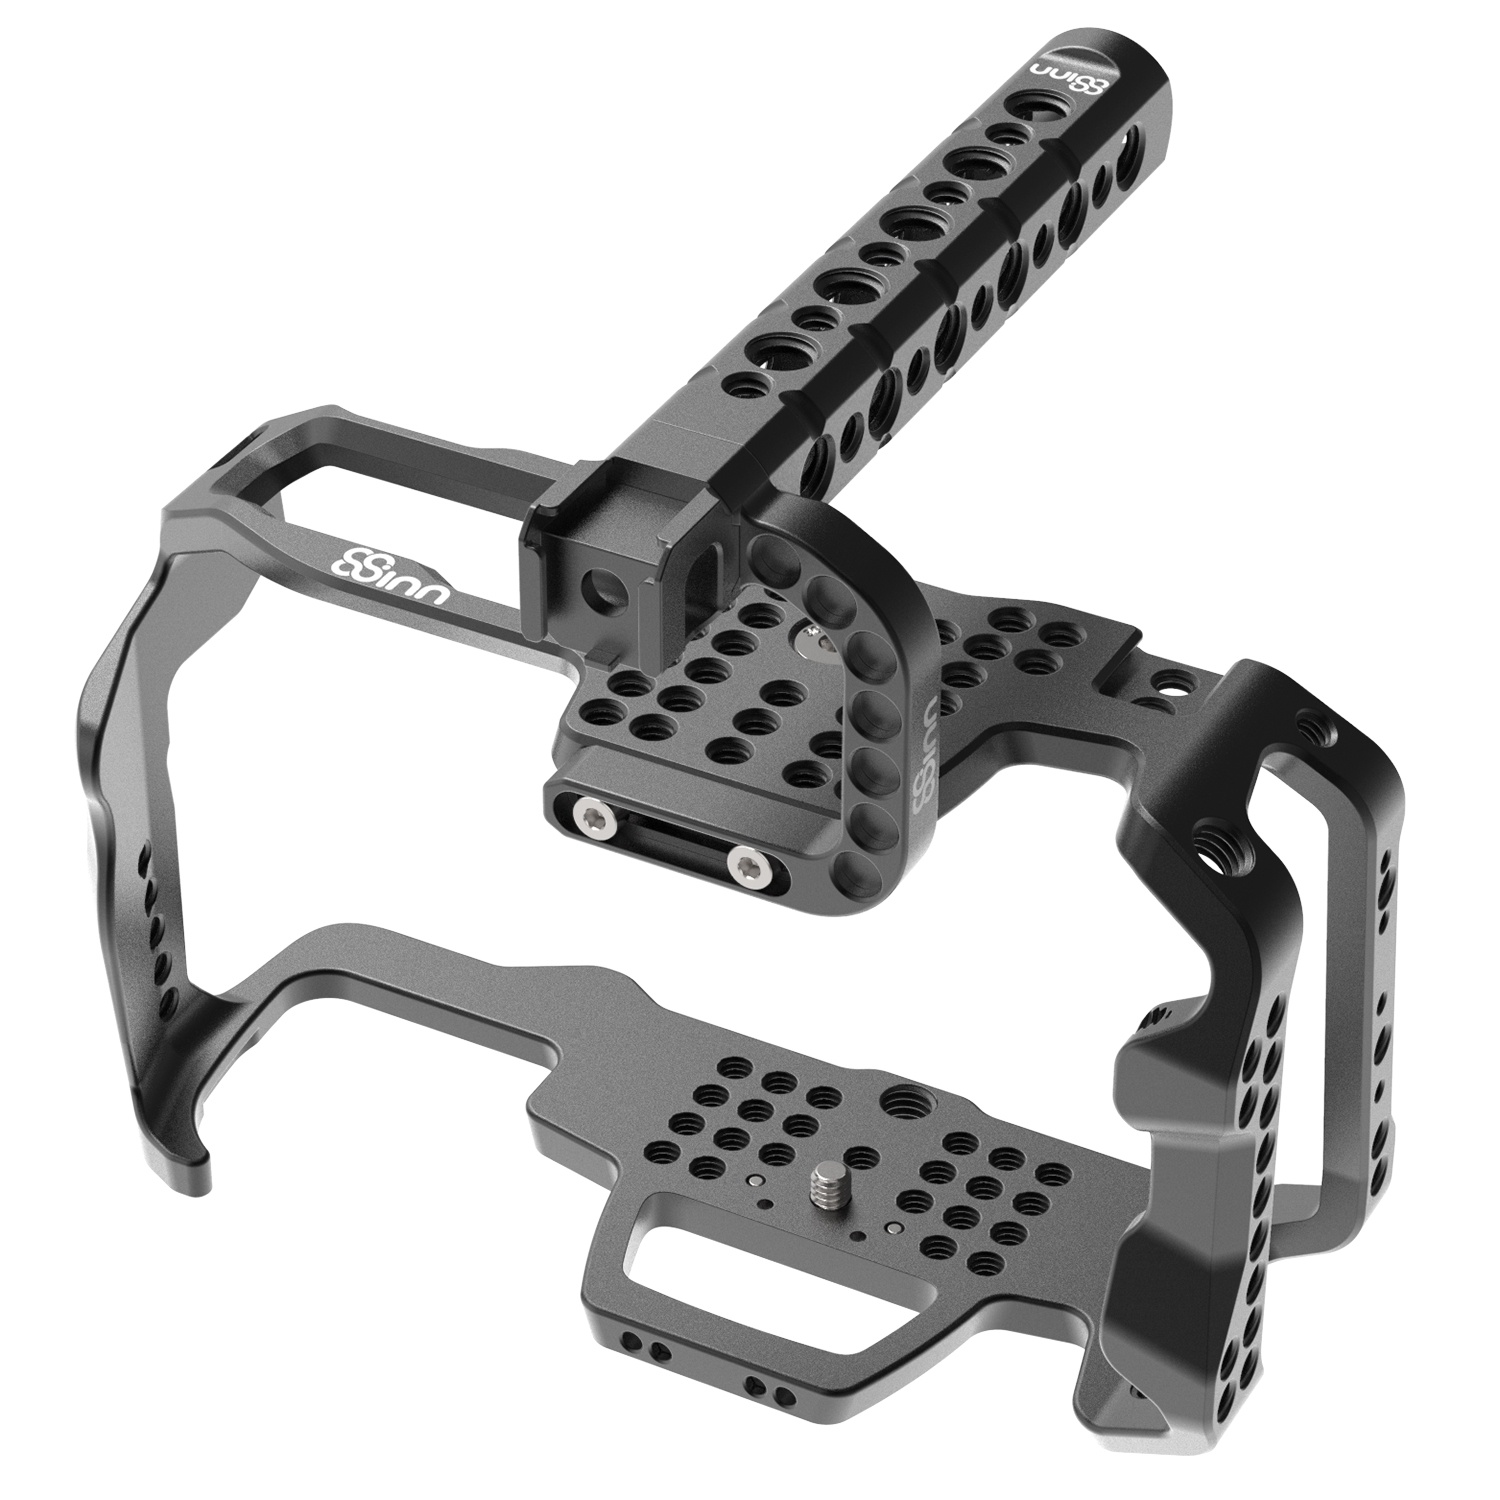 8Sinn Cage with Top Handle Basic for BMPCC 4K / 6K